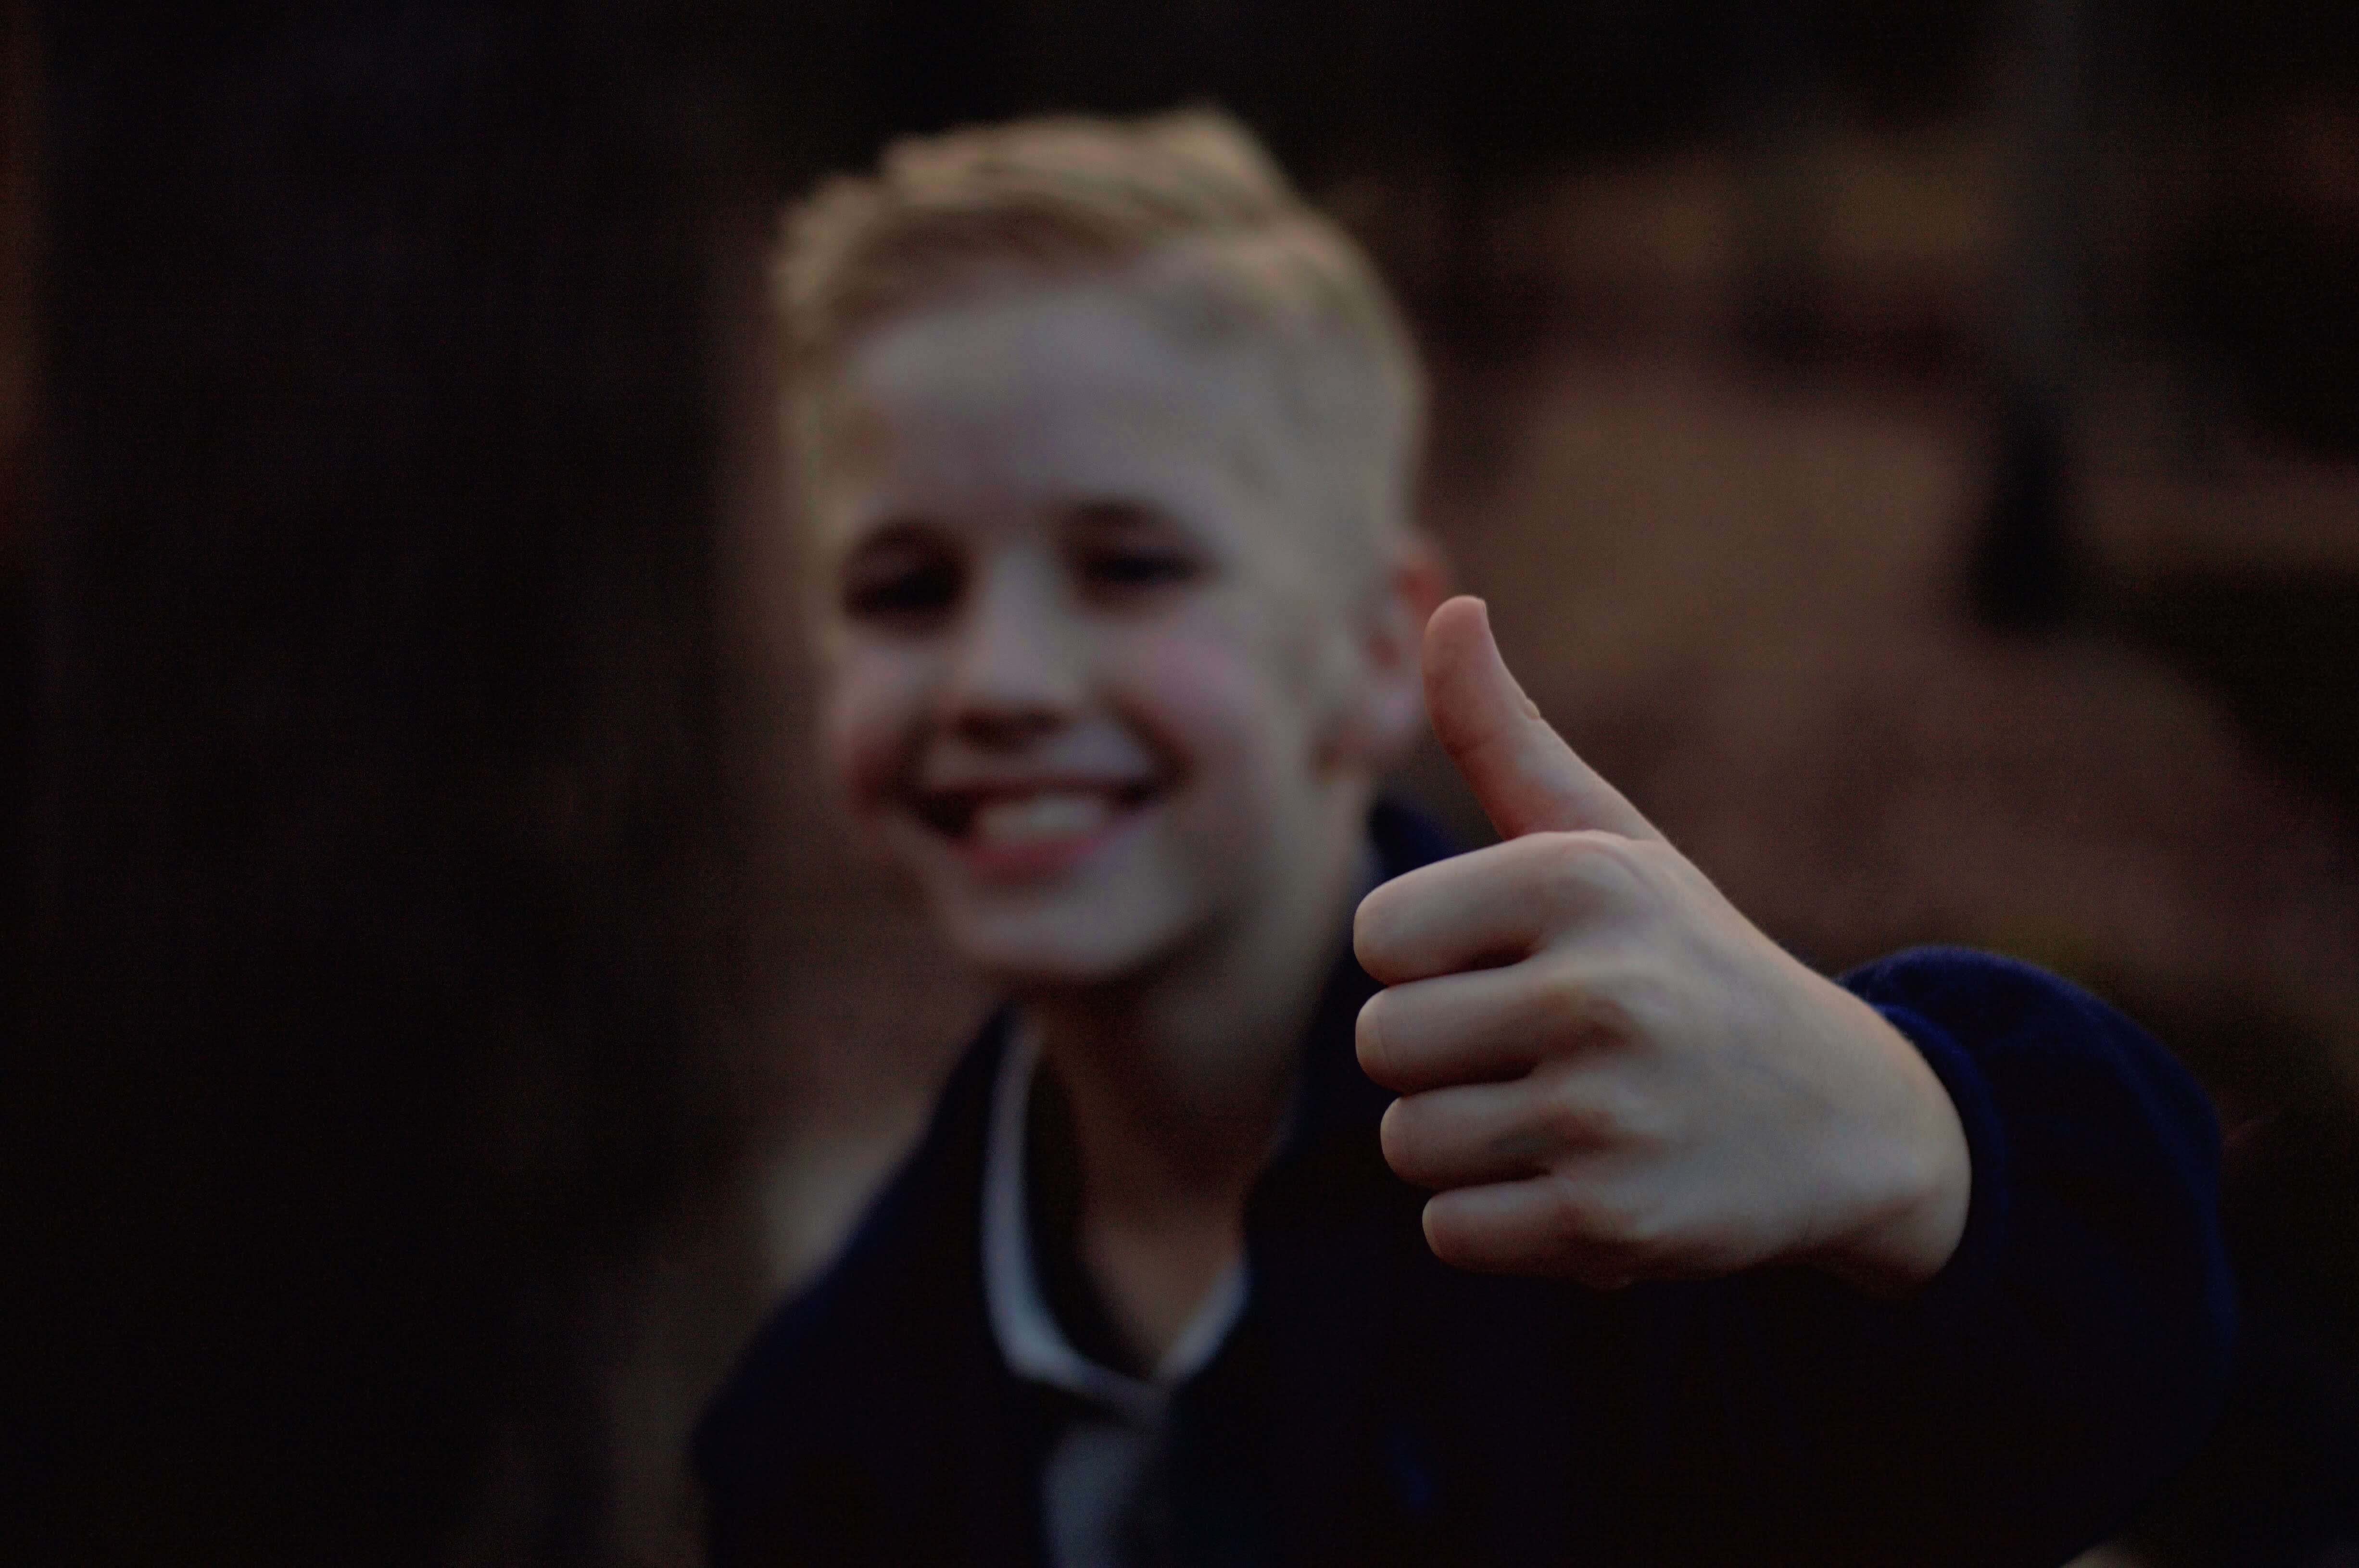 A blond child giving a thumbs up